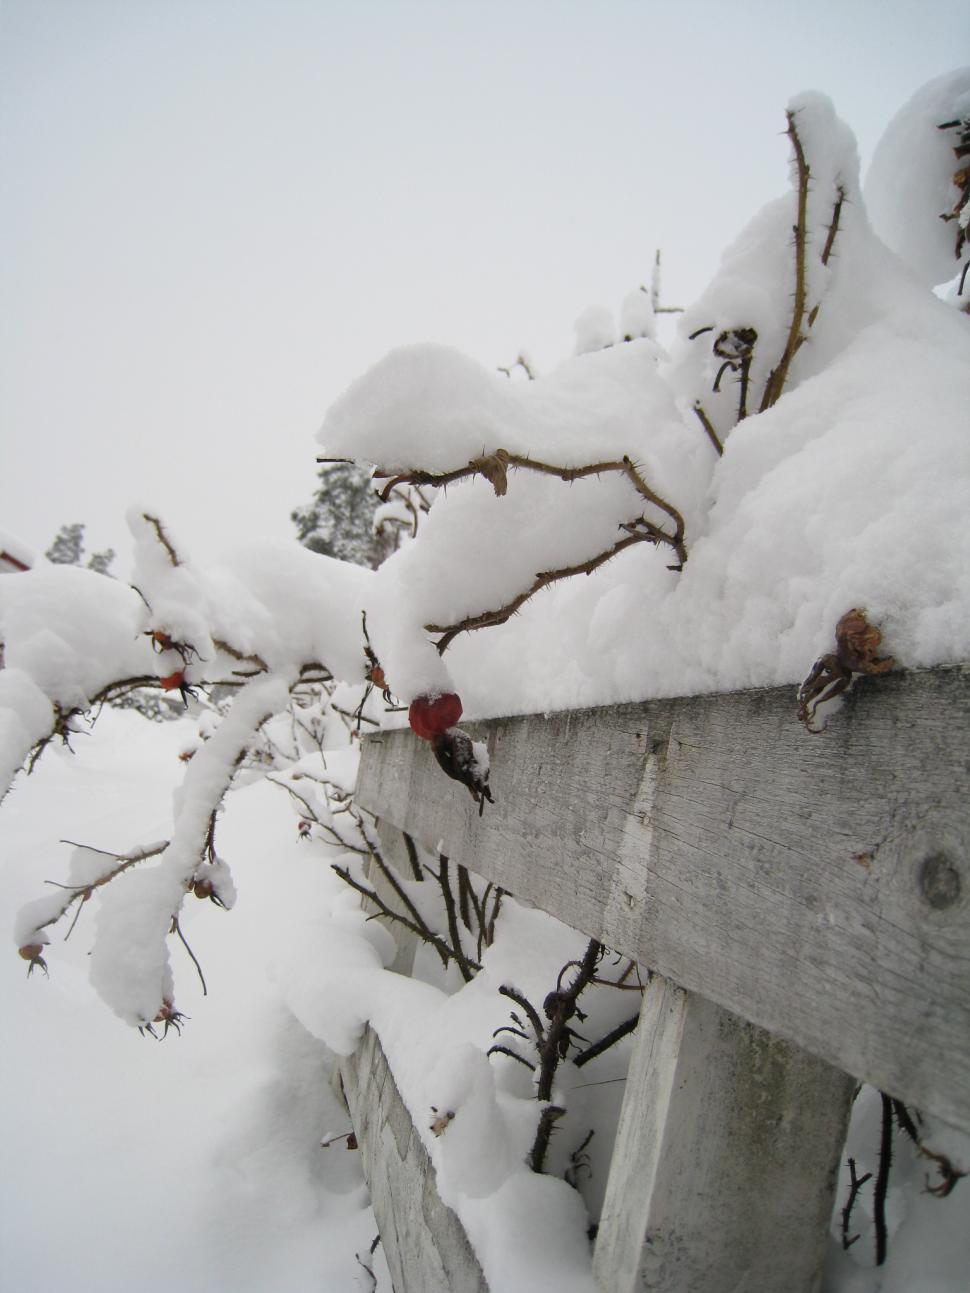 Free Image of Snow-Covered Wooden Bench Next to Tree 